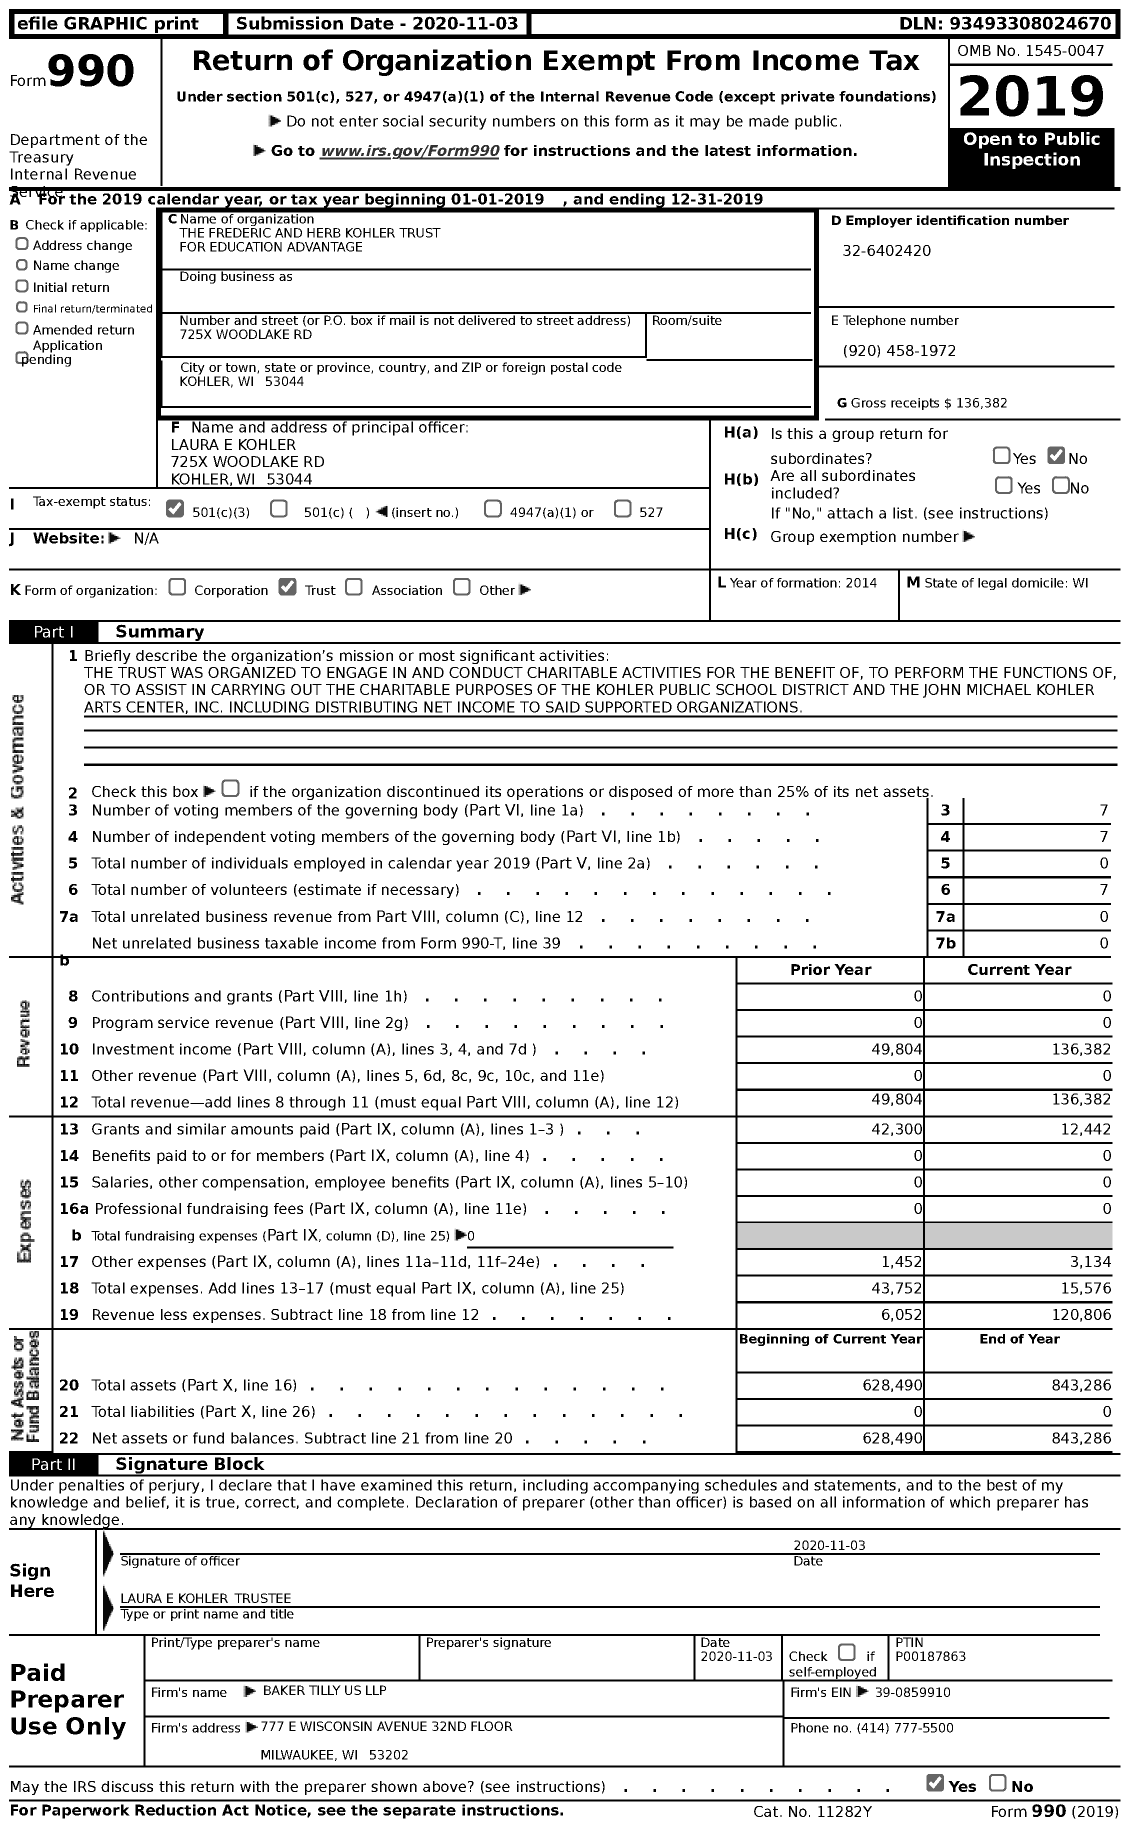 Image of first page of 2019 Form 990 for The Frederic and Herb Kohler Trust for Education Advantage